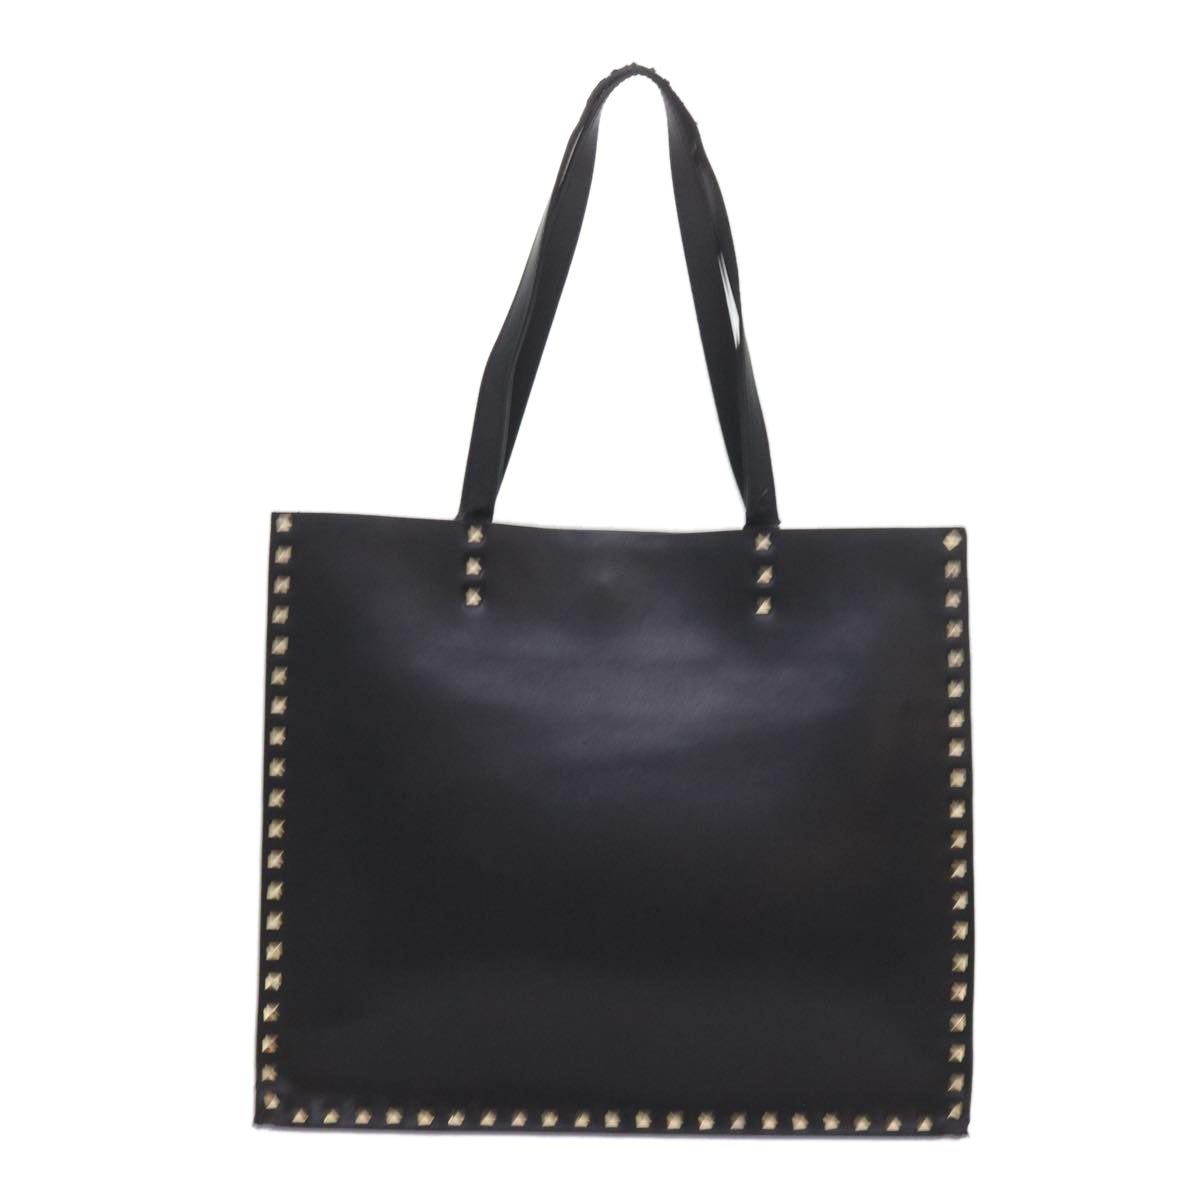 VALENTINO Tote Bag Leather Black Auth bs8764 - 0